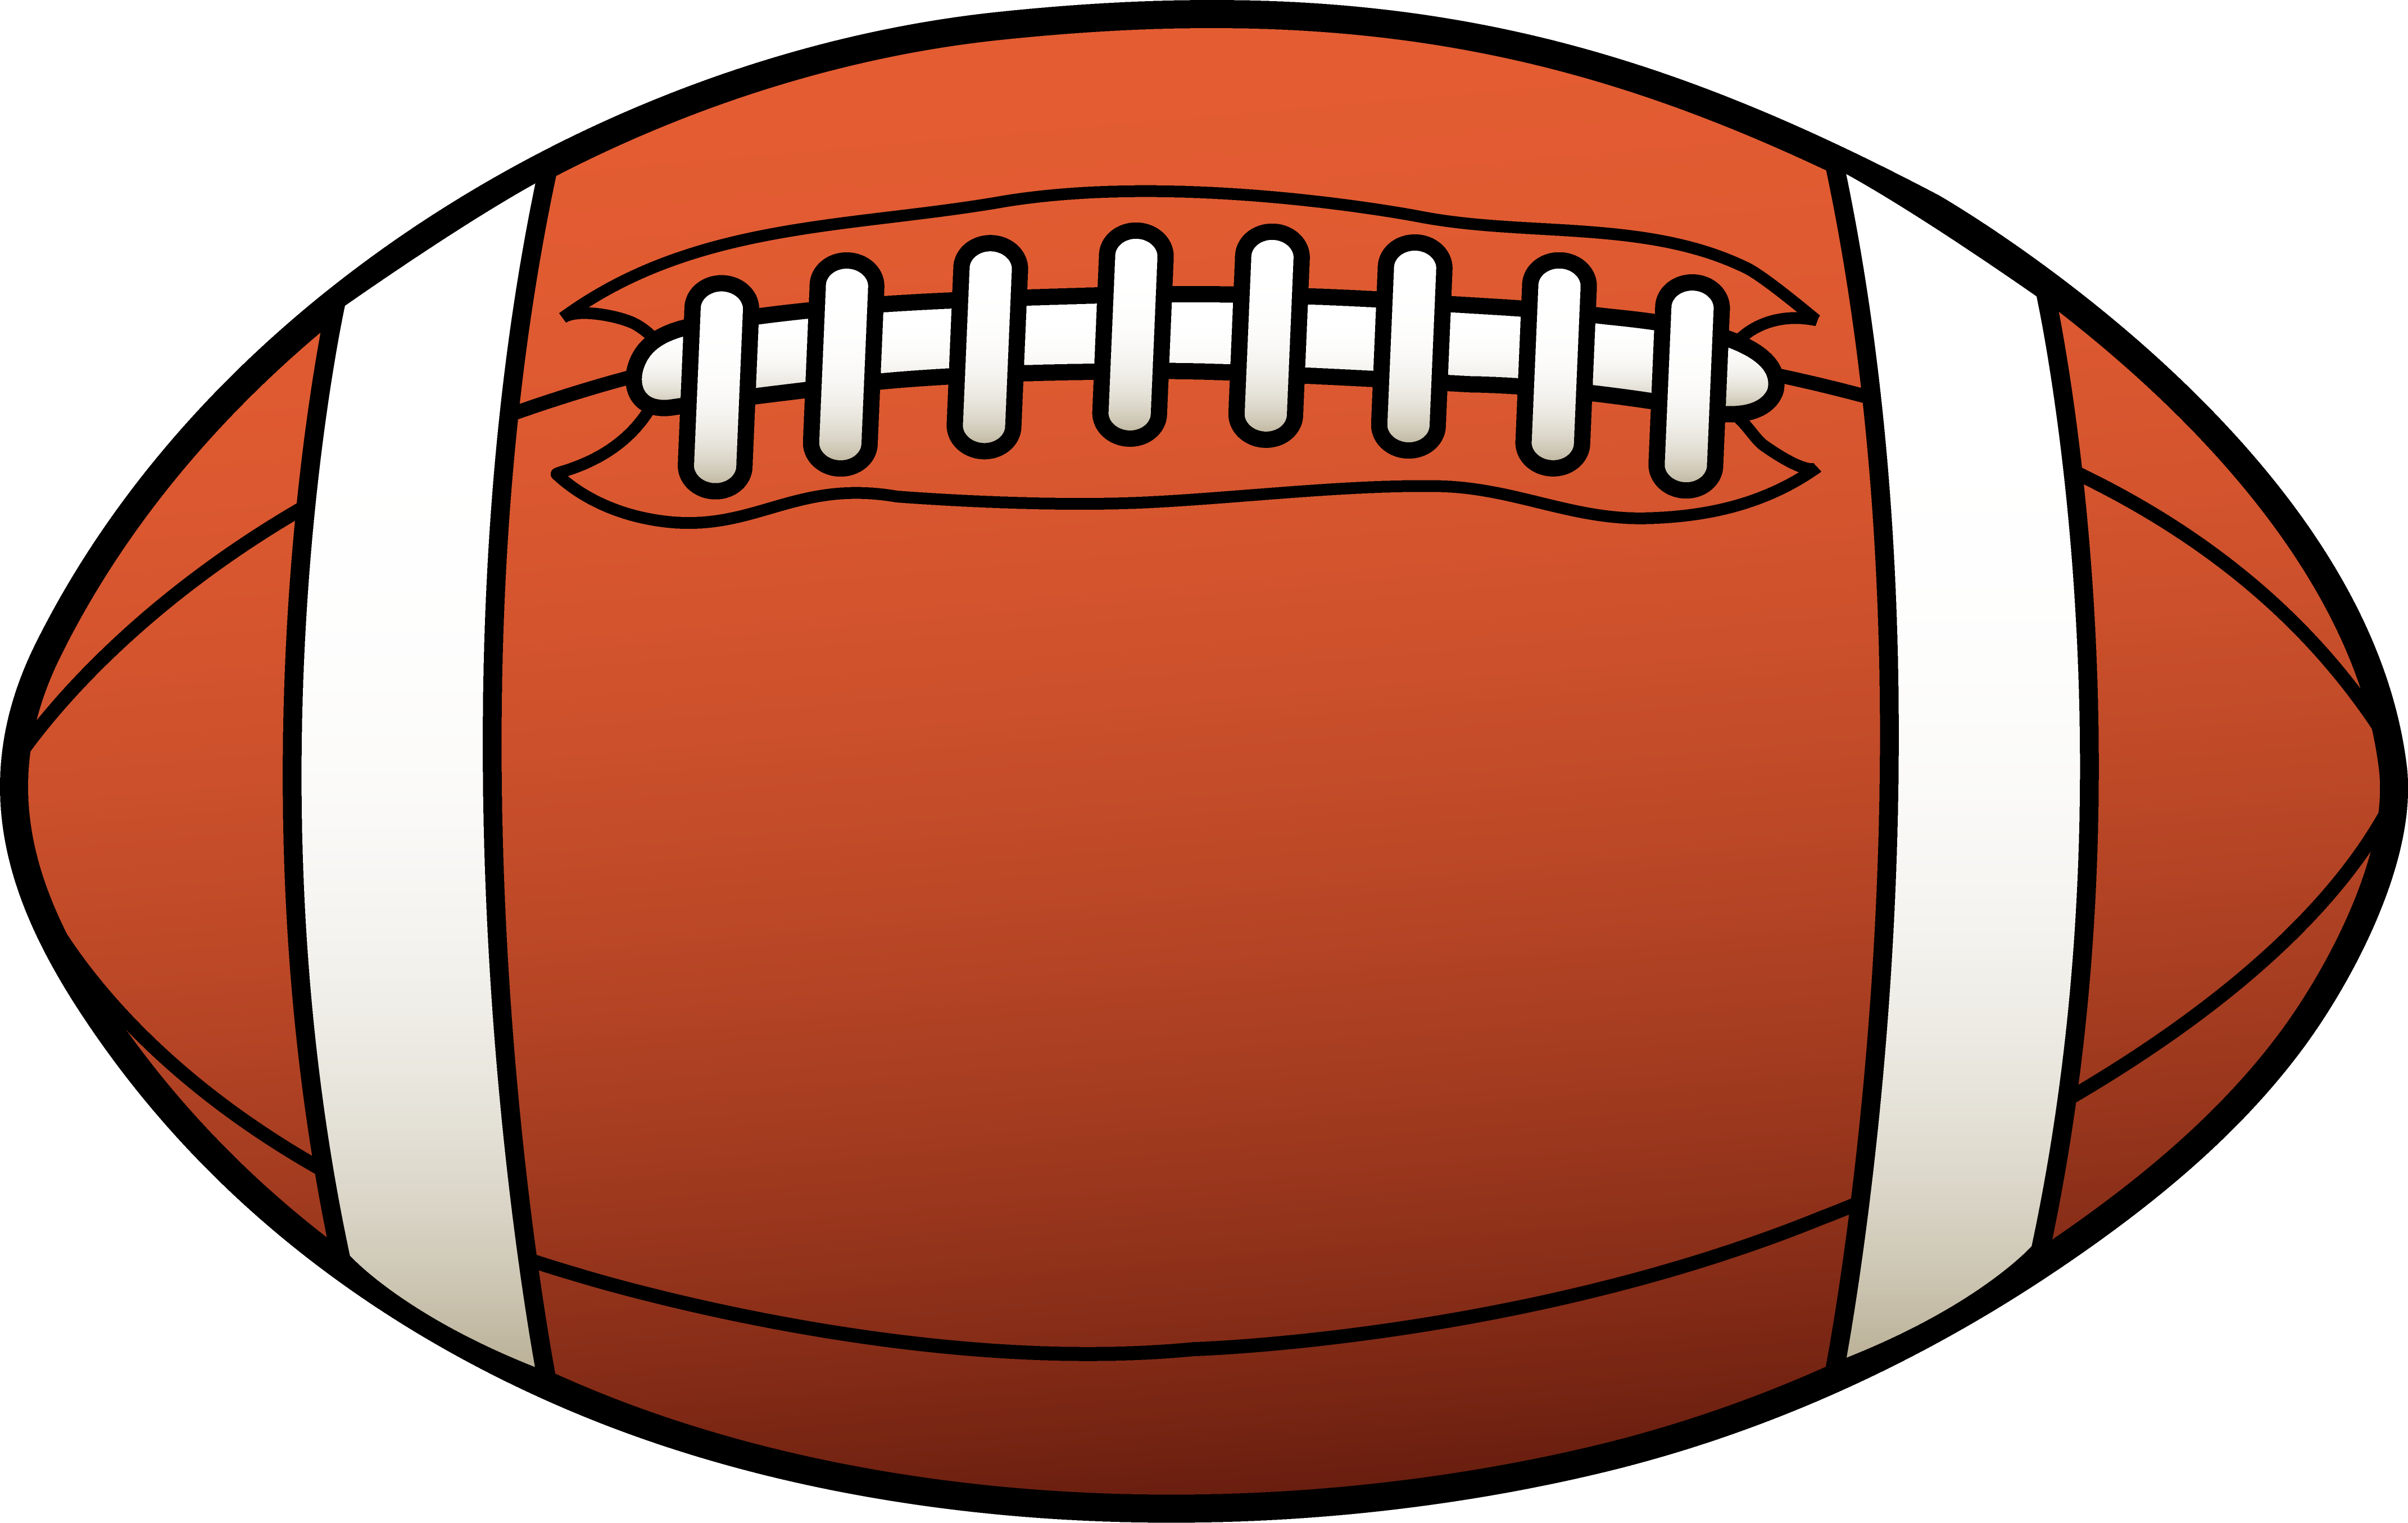 Picture Of A Football - ClipArt Best